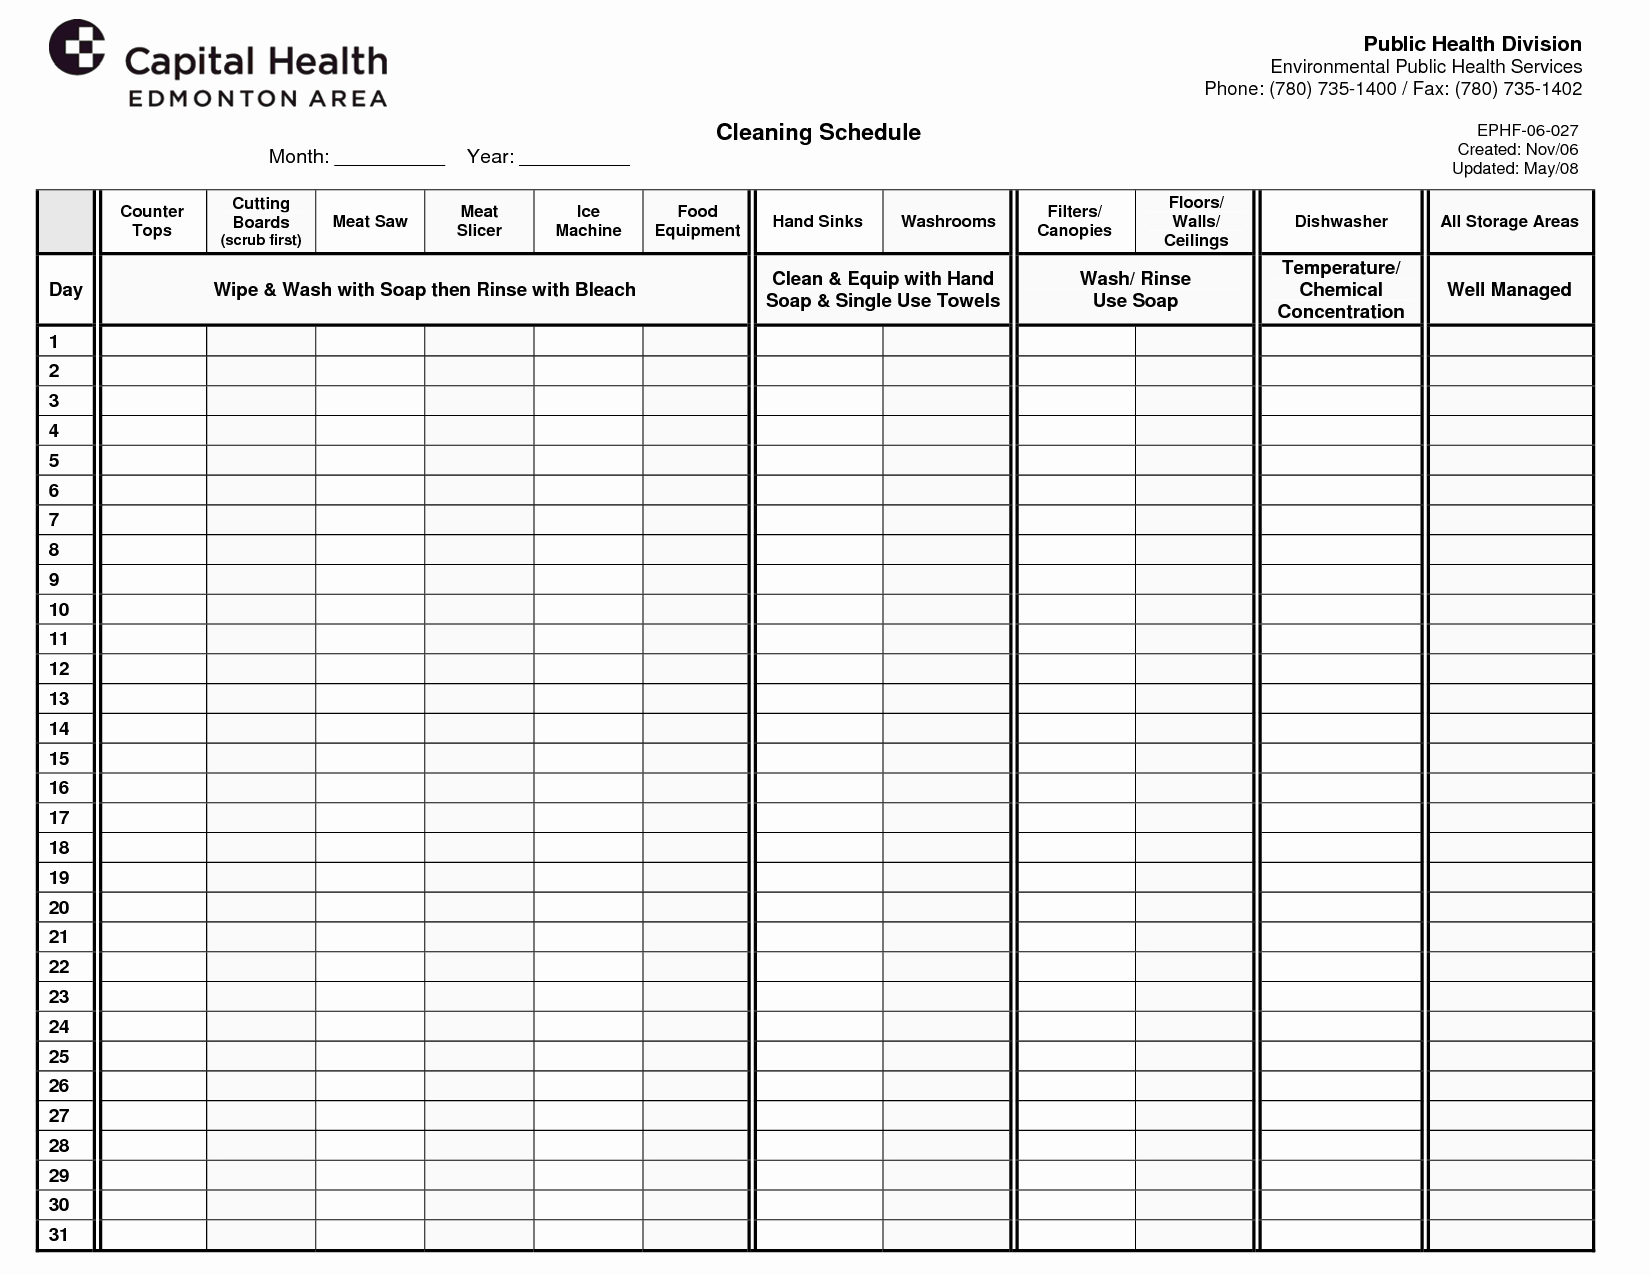 Bathroom Cleaning Checklist Template Awesome Restaurant Food Storage Chart